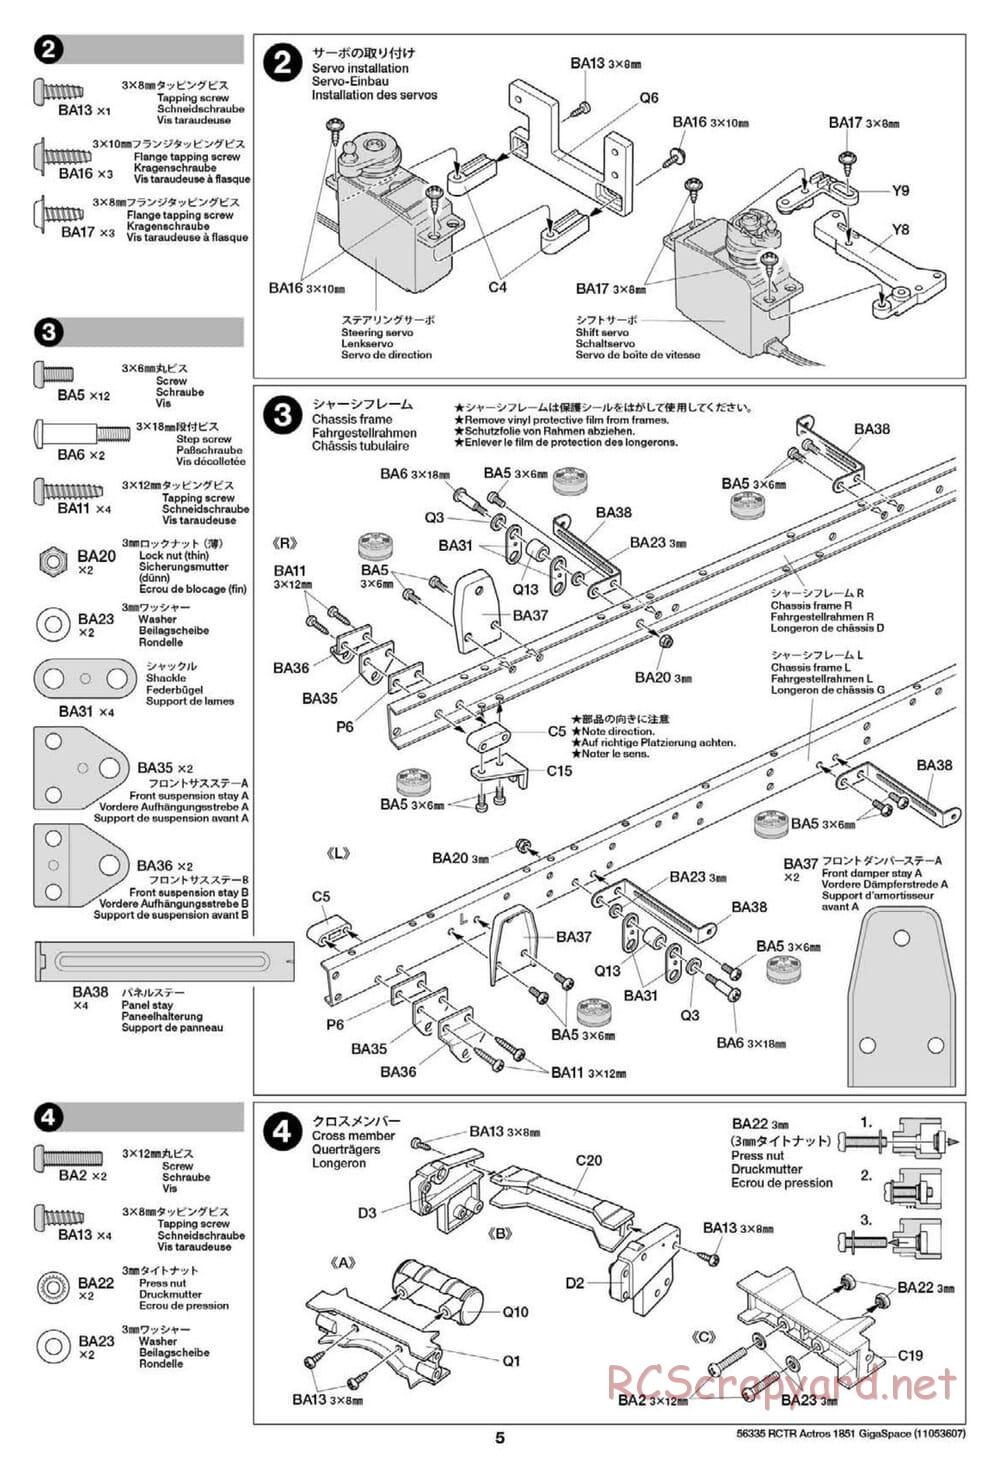 Tamiya - Mercedes-Benz Actros 1851 Gigaspace Tractor Truck Chassis - Manual - Page 5